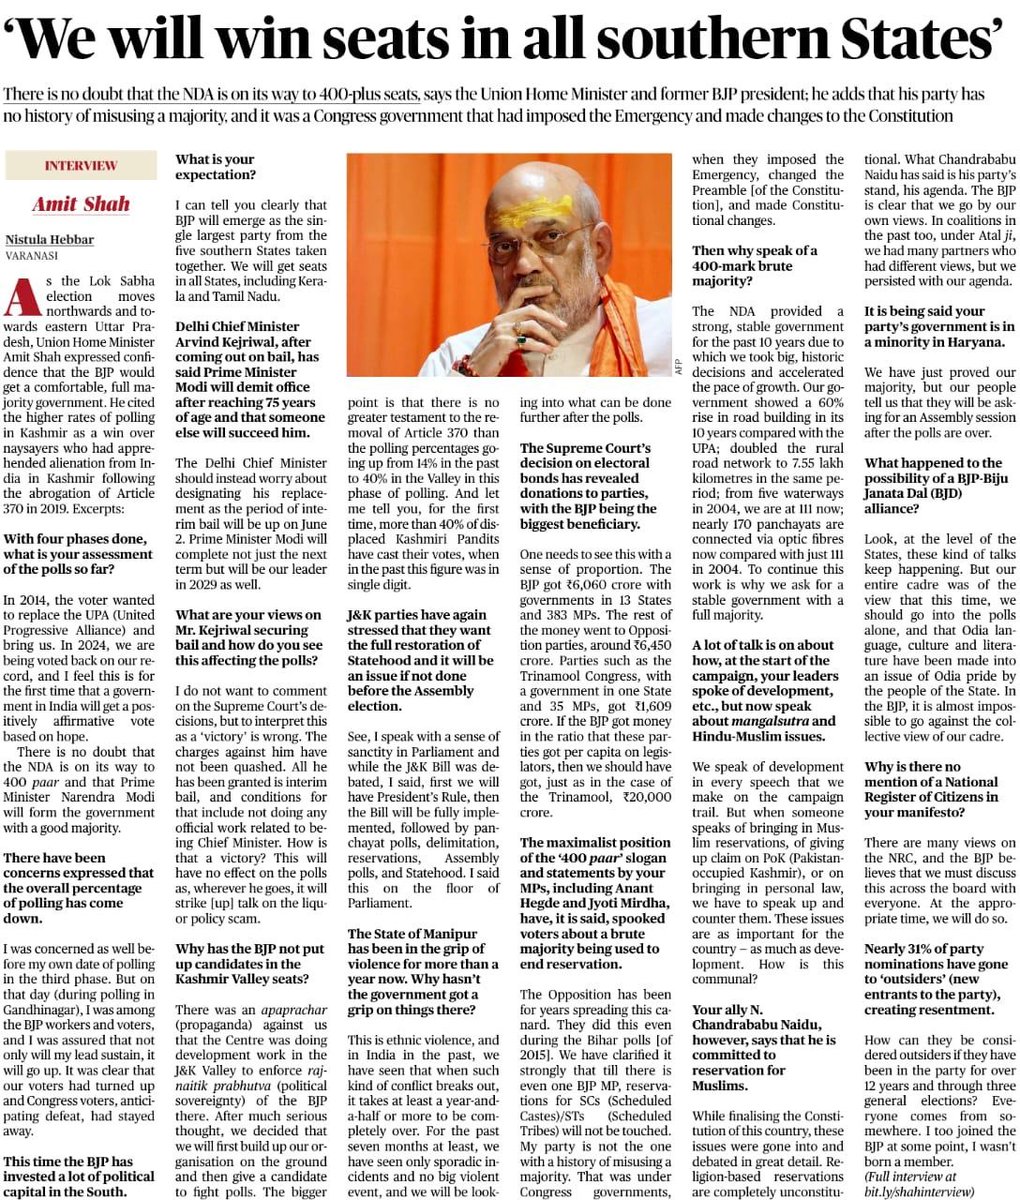 The policies of inclusive development of PM @narendramodi Ji have resonated loud & clear across the nation & @BJP4India will win seats in all Southern states. For an in-depth conversation on this & more with Union Home Minister @AmitShah Ji, read the full interview in…